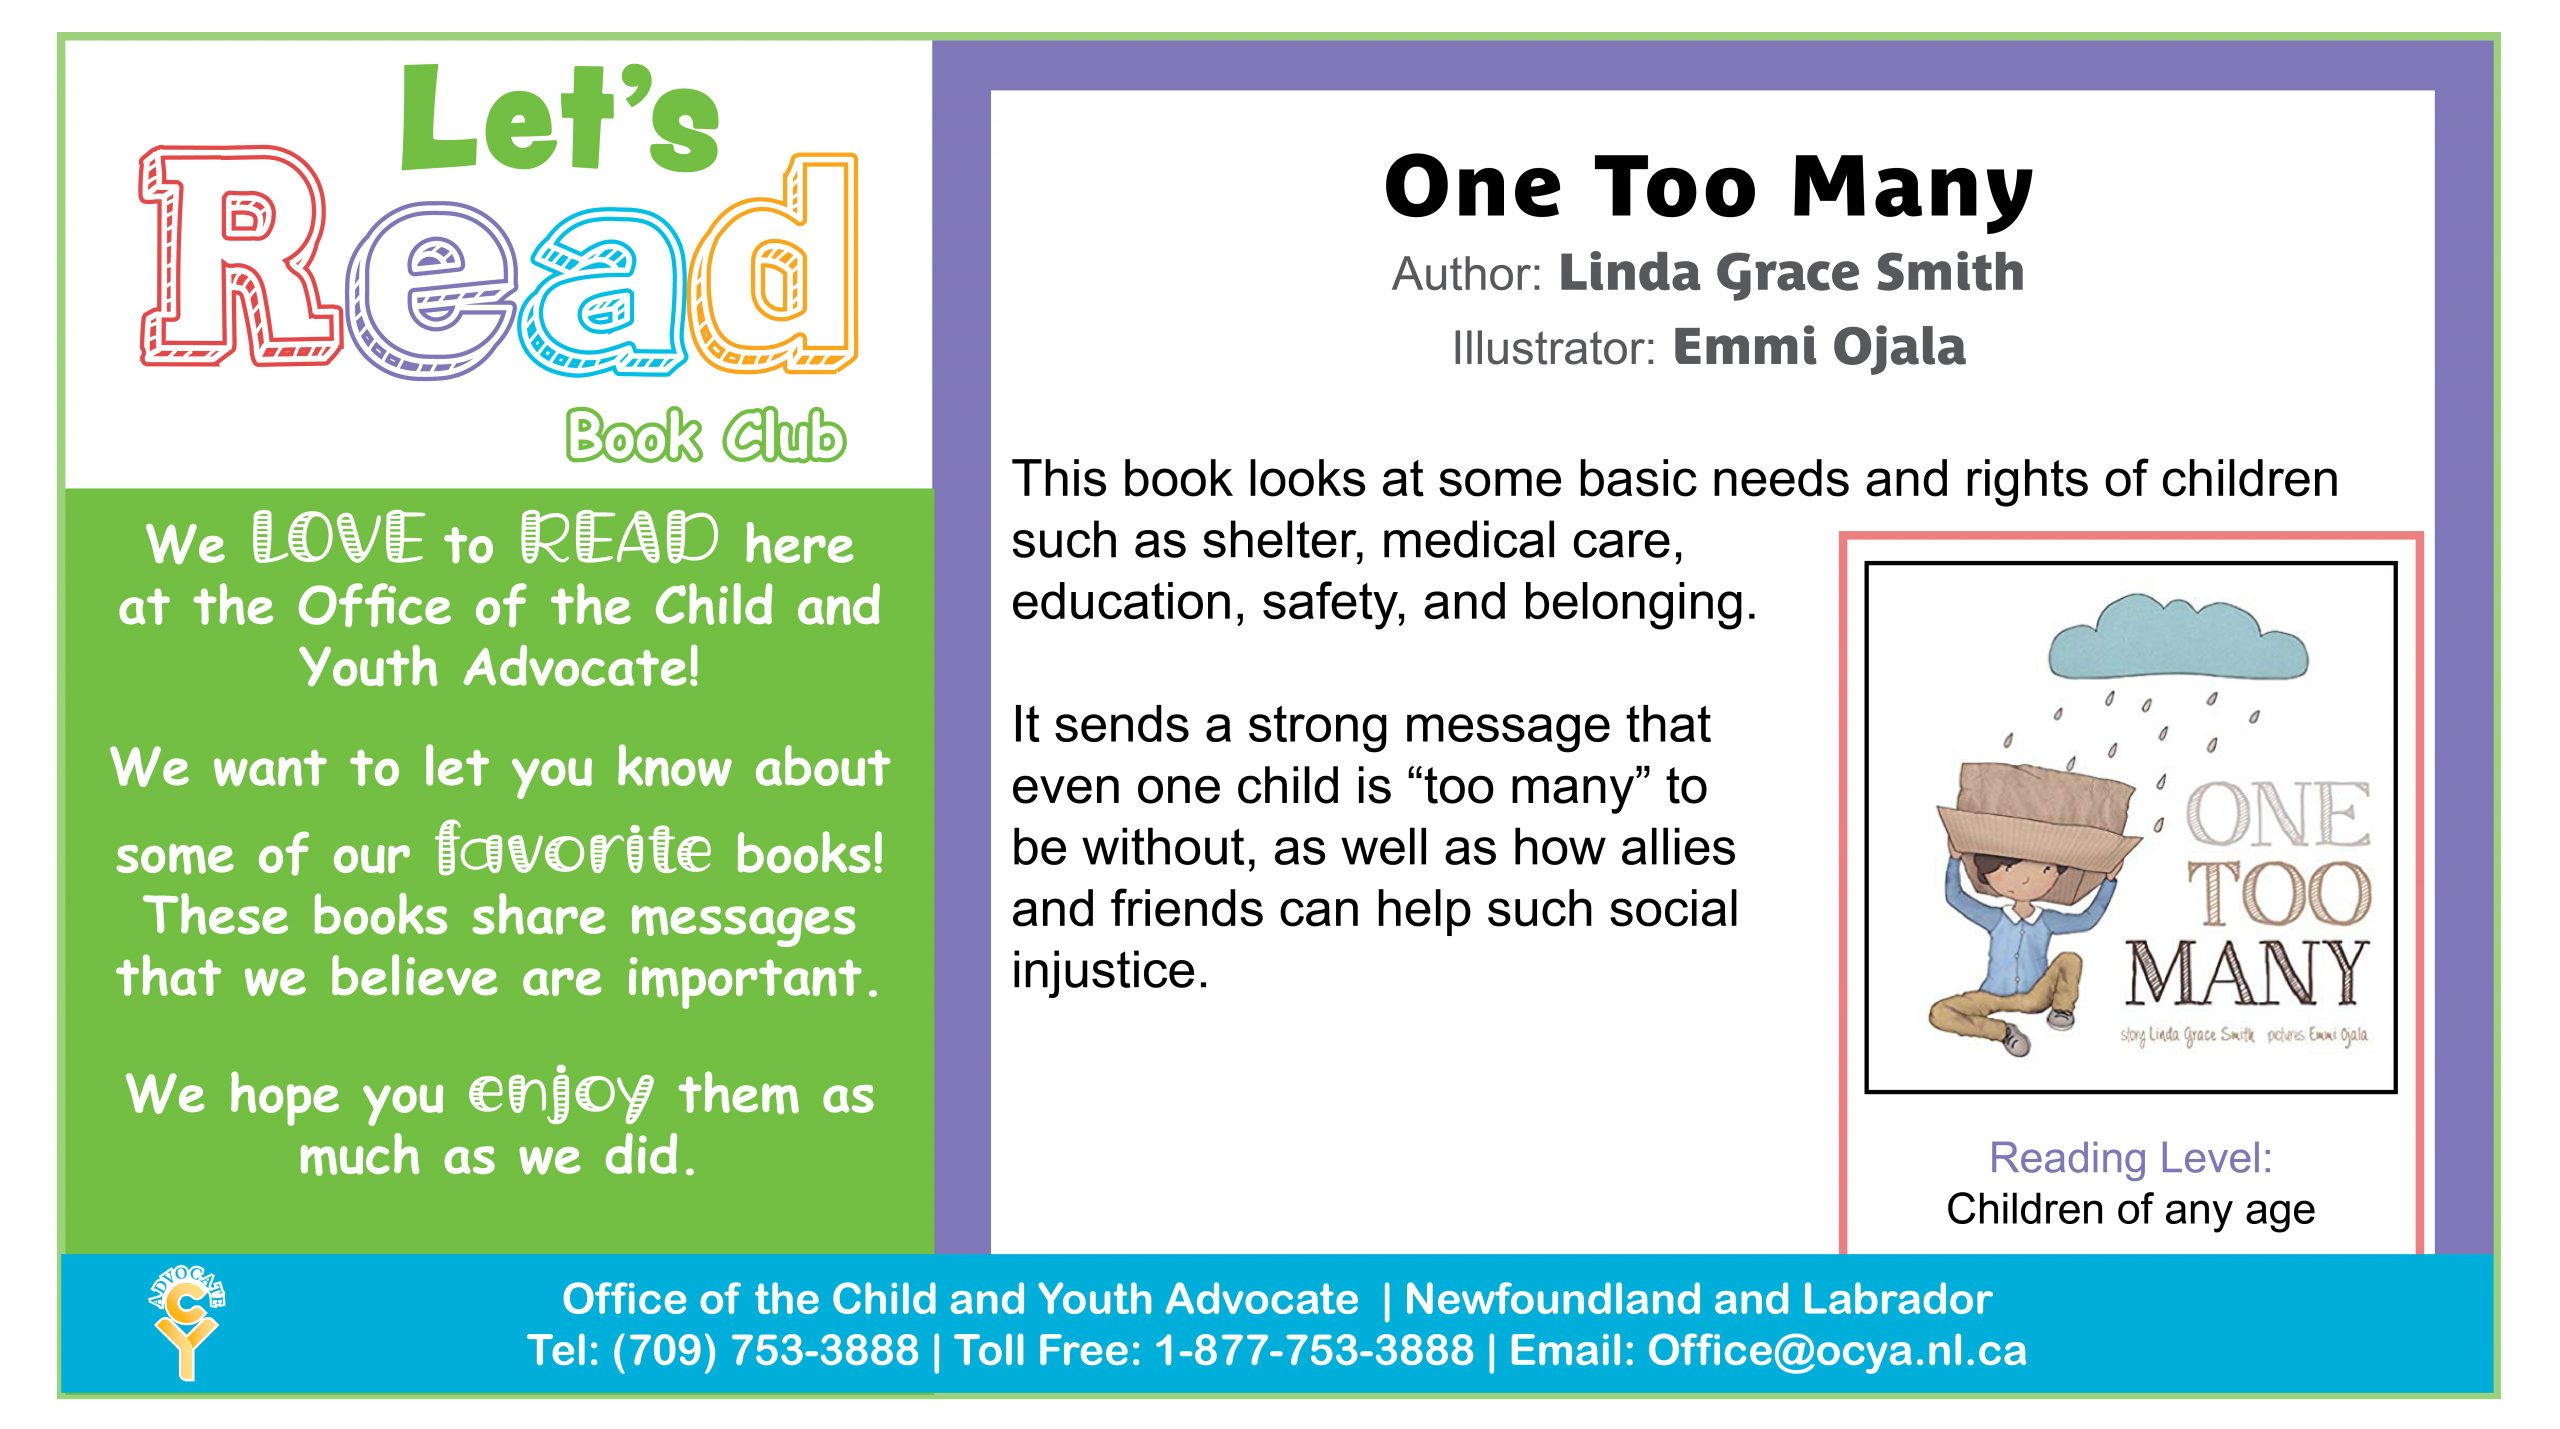 One Too Many by Linda Grace Smith. This book looks at some basic needs and rights of children such as shelter, medical care, education, safety and belonging. It sends a strong message that even one child is 